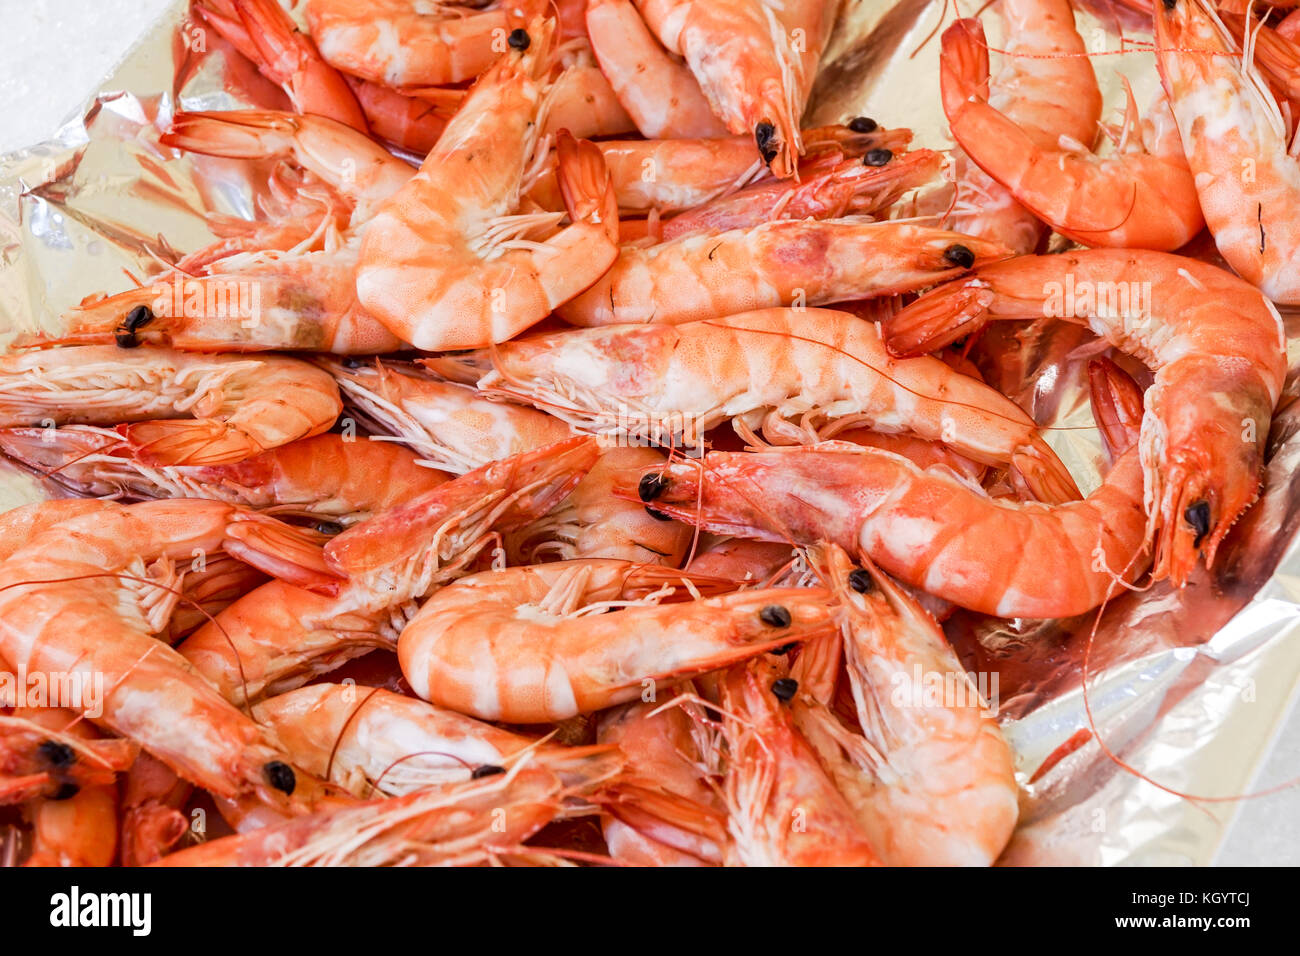 Shrimp cocktail background with a close up view of a group of fresh delicious refrigerated crustaceans as gourmet seafood for a party or dinner at a restaurant serving food from the sea Stock Photo